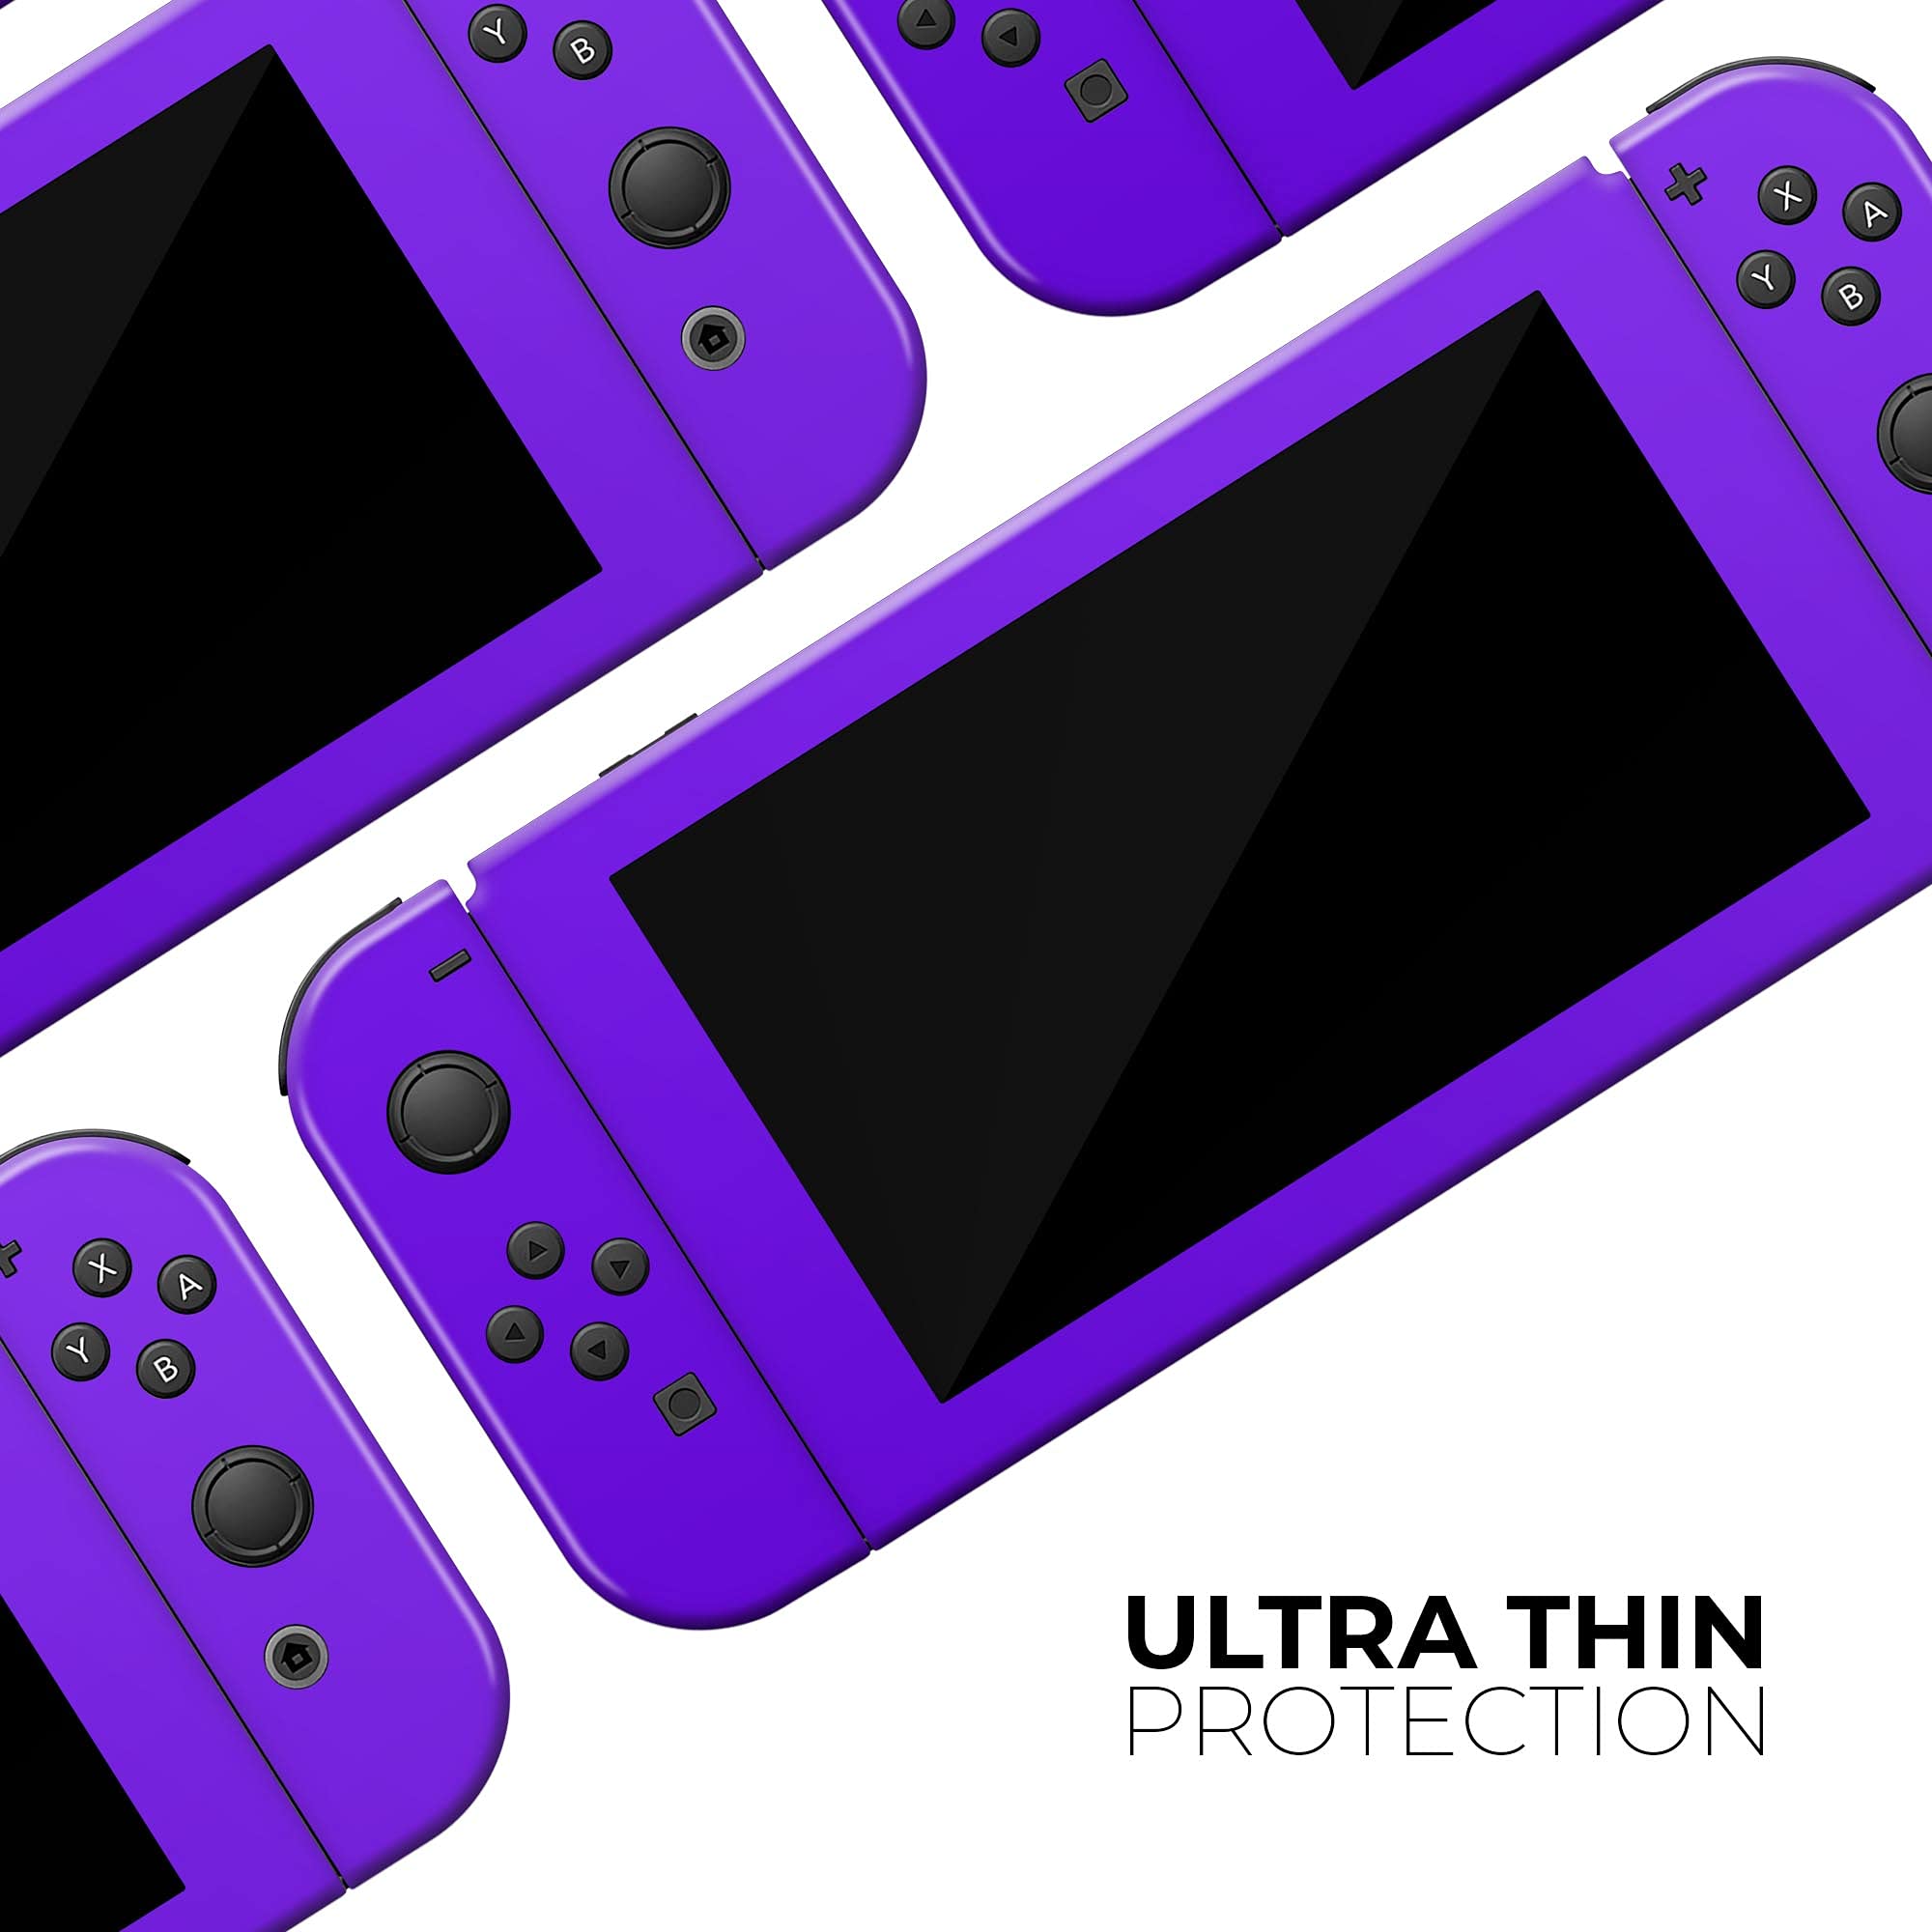 Design Skinz - Compatible with Nintendo Switch Console + Joy-Con - Skin Decal Protective Scratch-Resistant Removable Vinyl Wrap Cover - Solid Purple